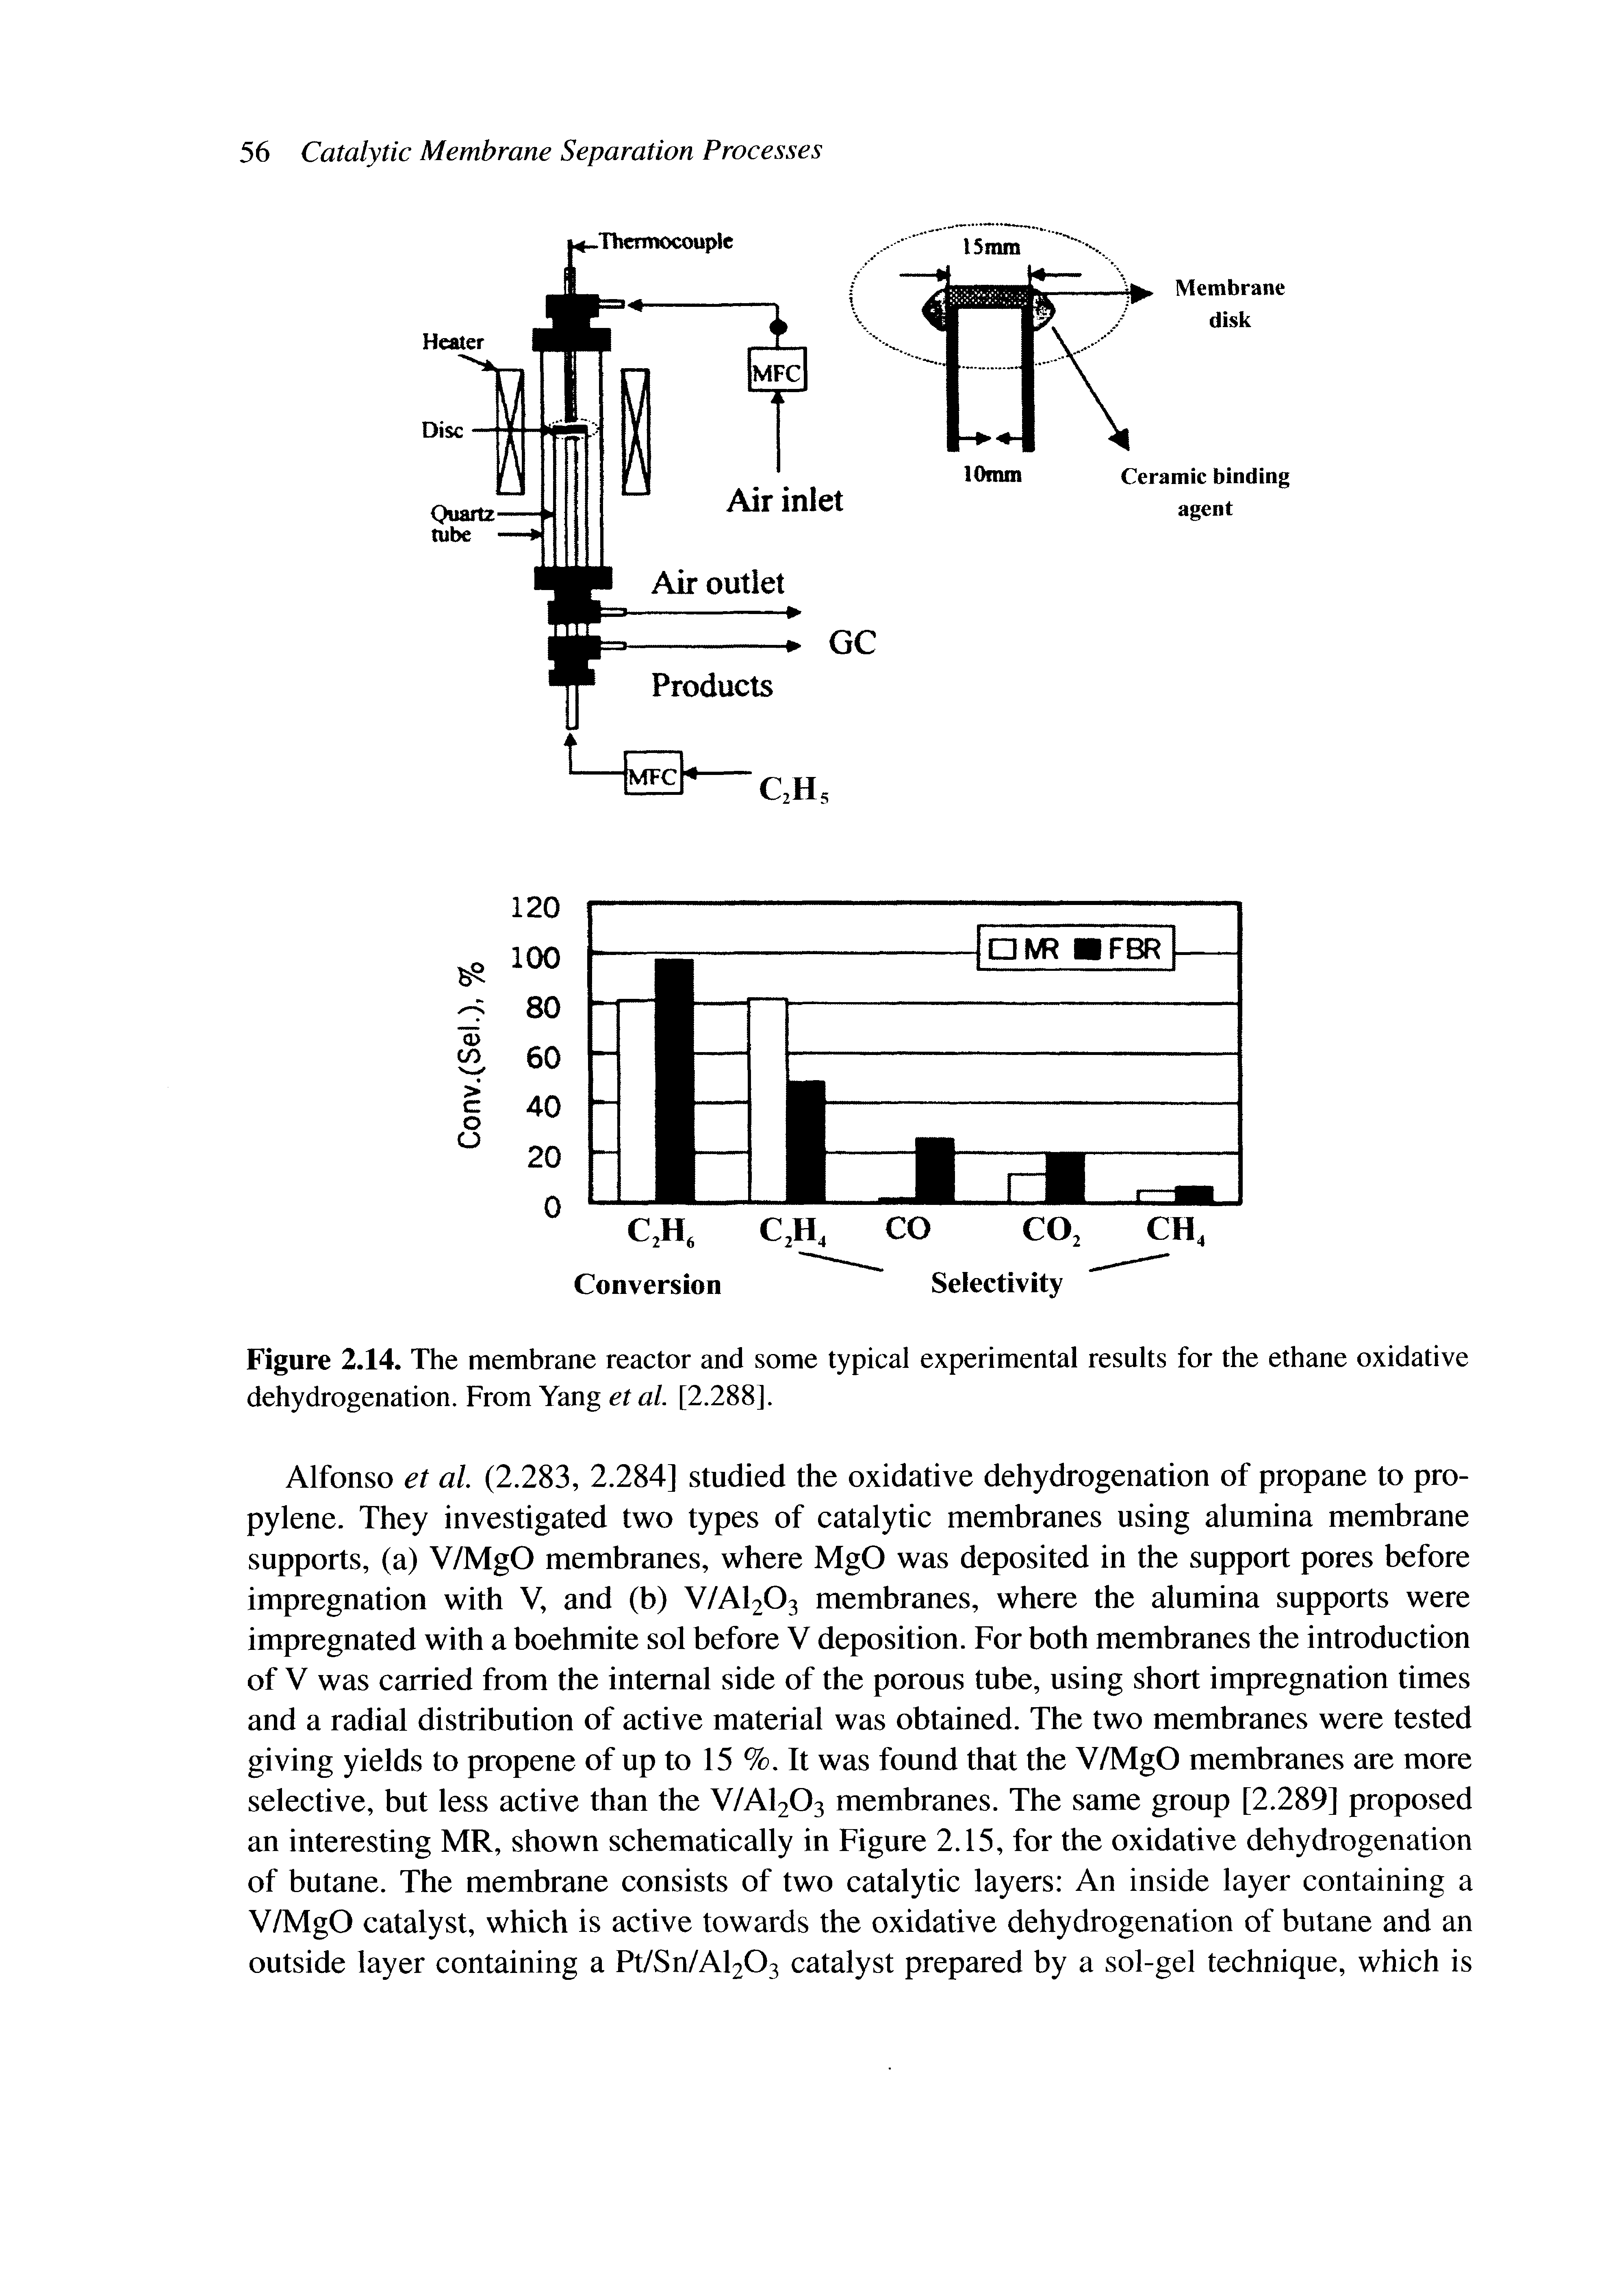 Figure 2.14. The membrane reactor and some typical experimental results for the ethane oxidative dehydrogenation. From Yang et al. [2.288].